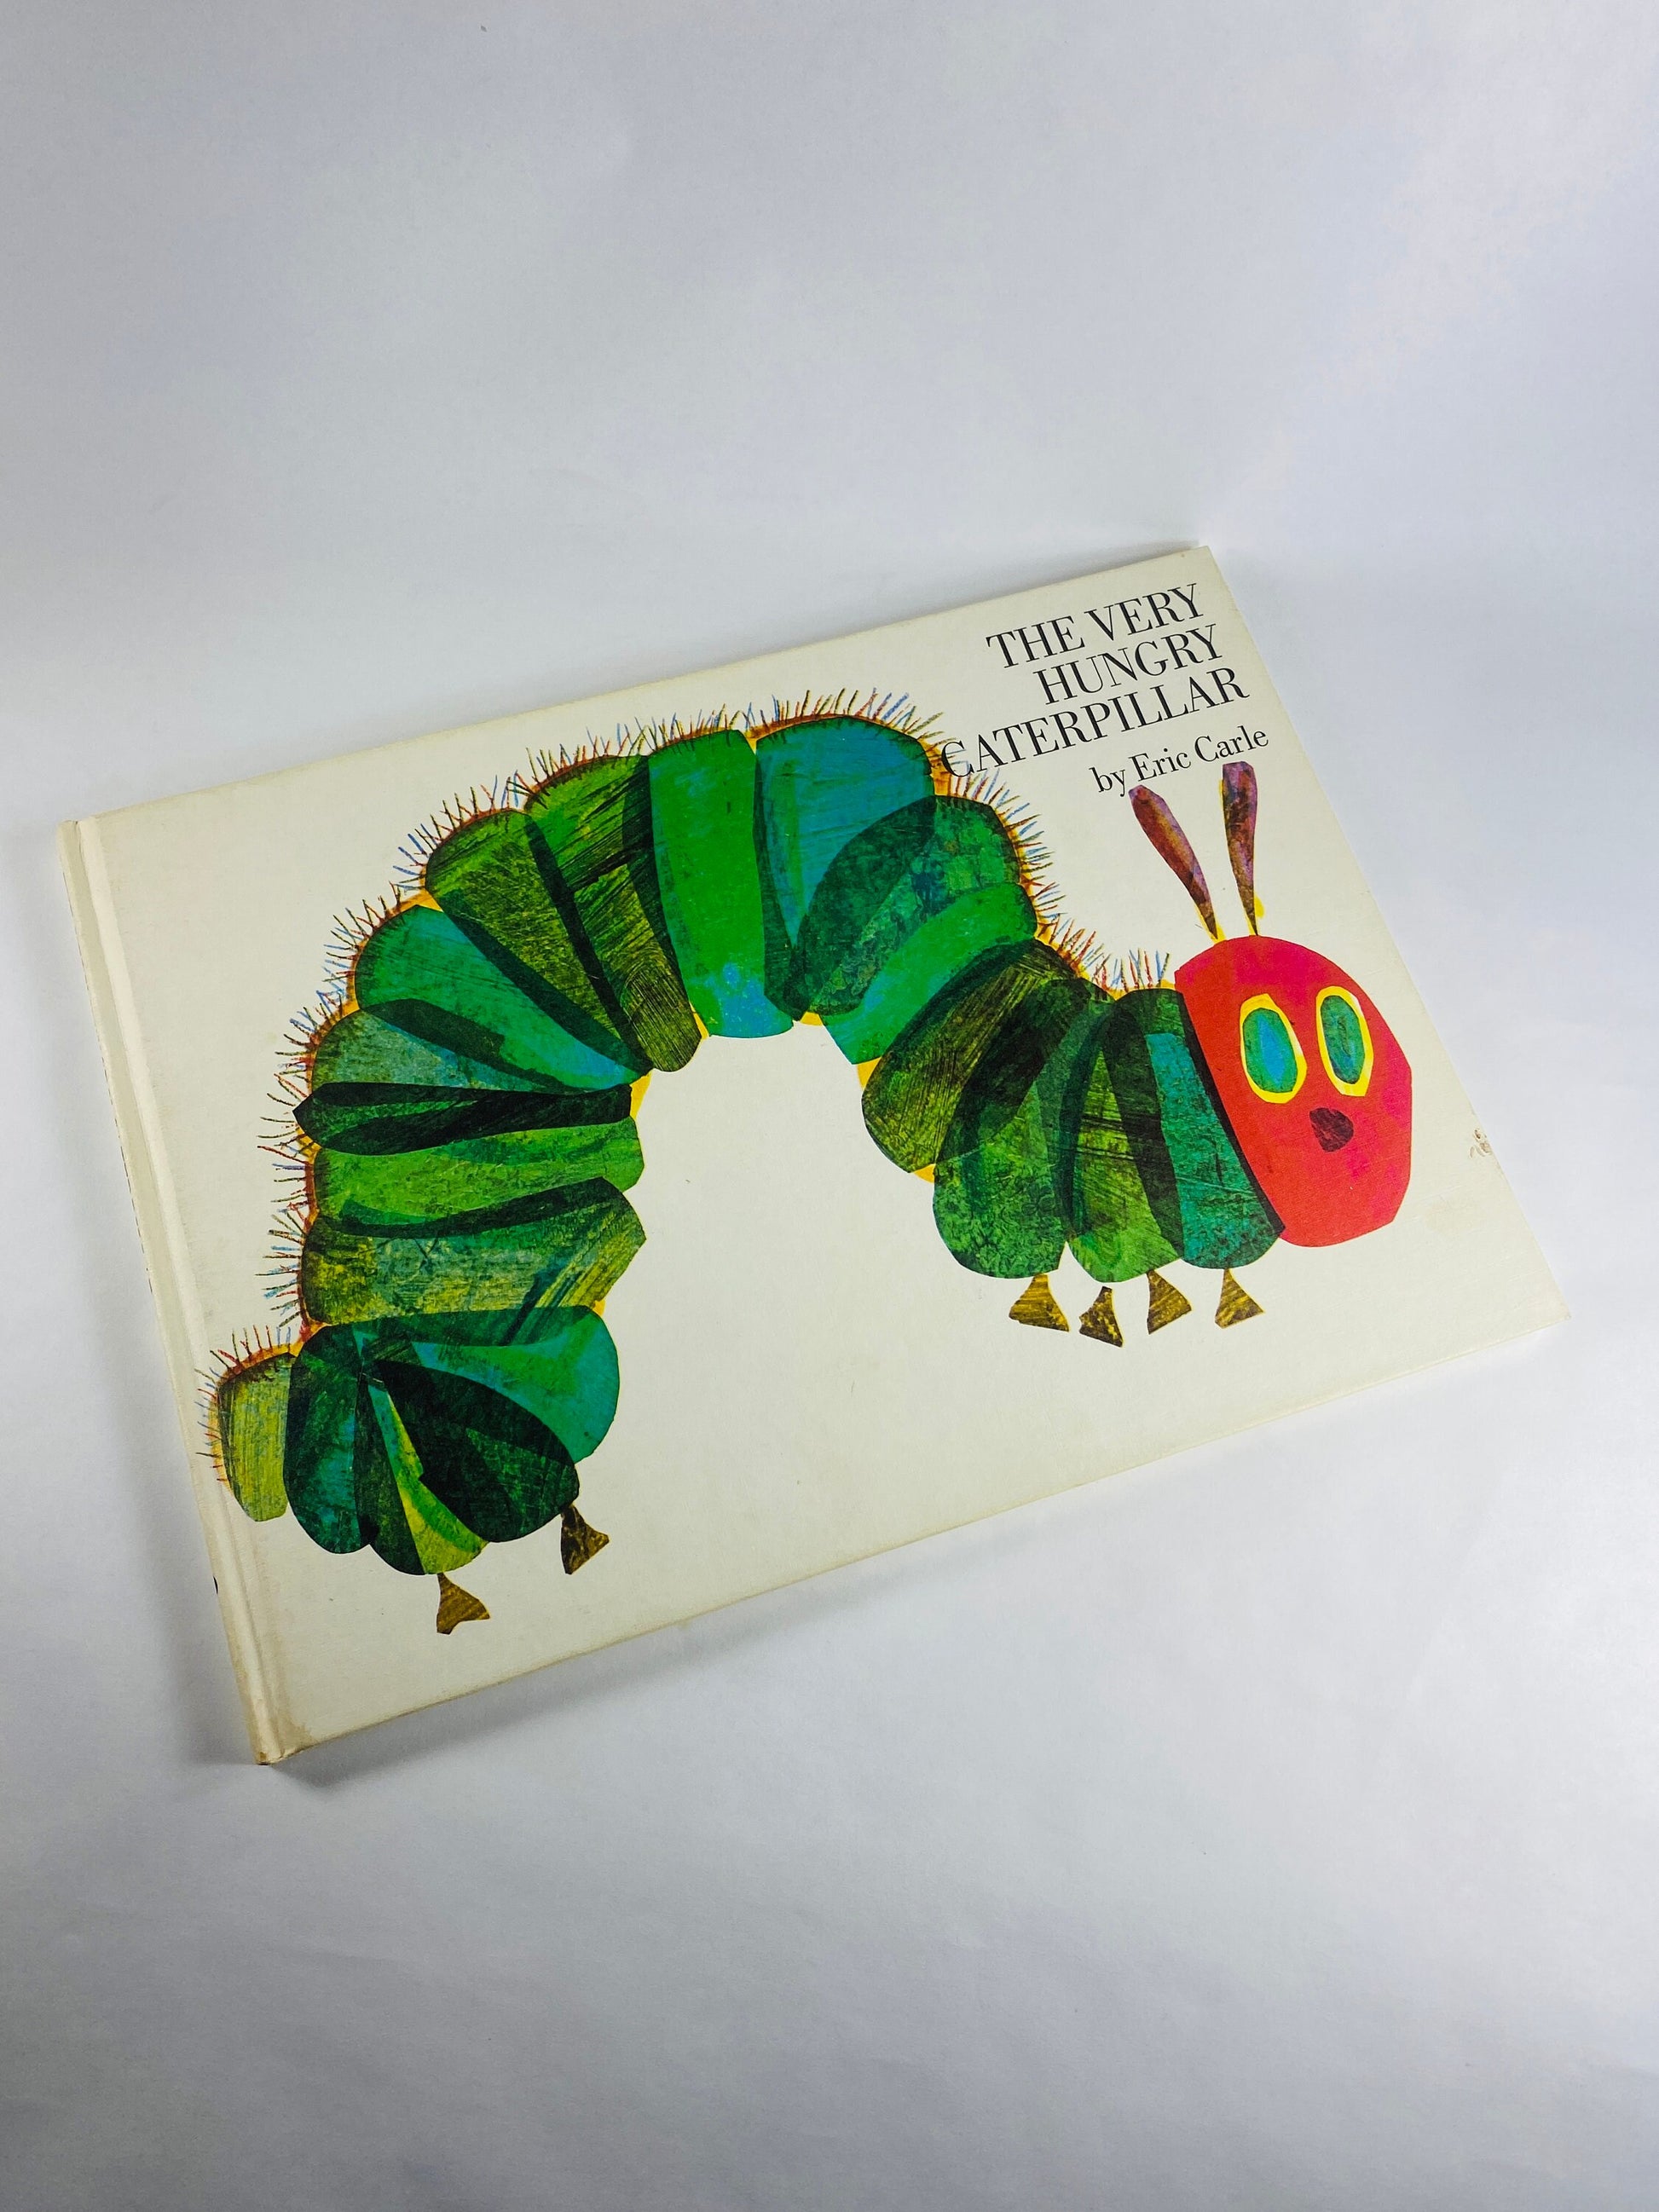 1976 Hungry Caterpillar vintage book by Eric Carle EARLY PRINTING Children’s book about filling tummy with literature.